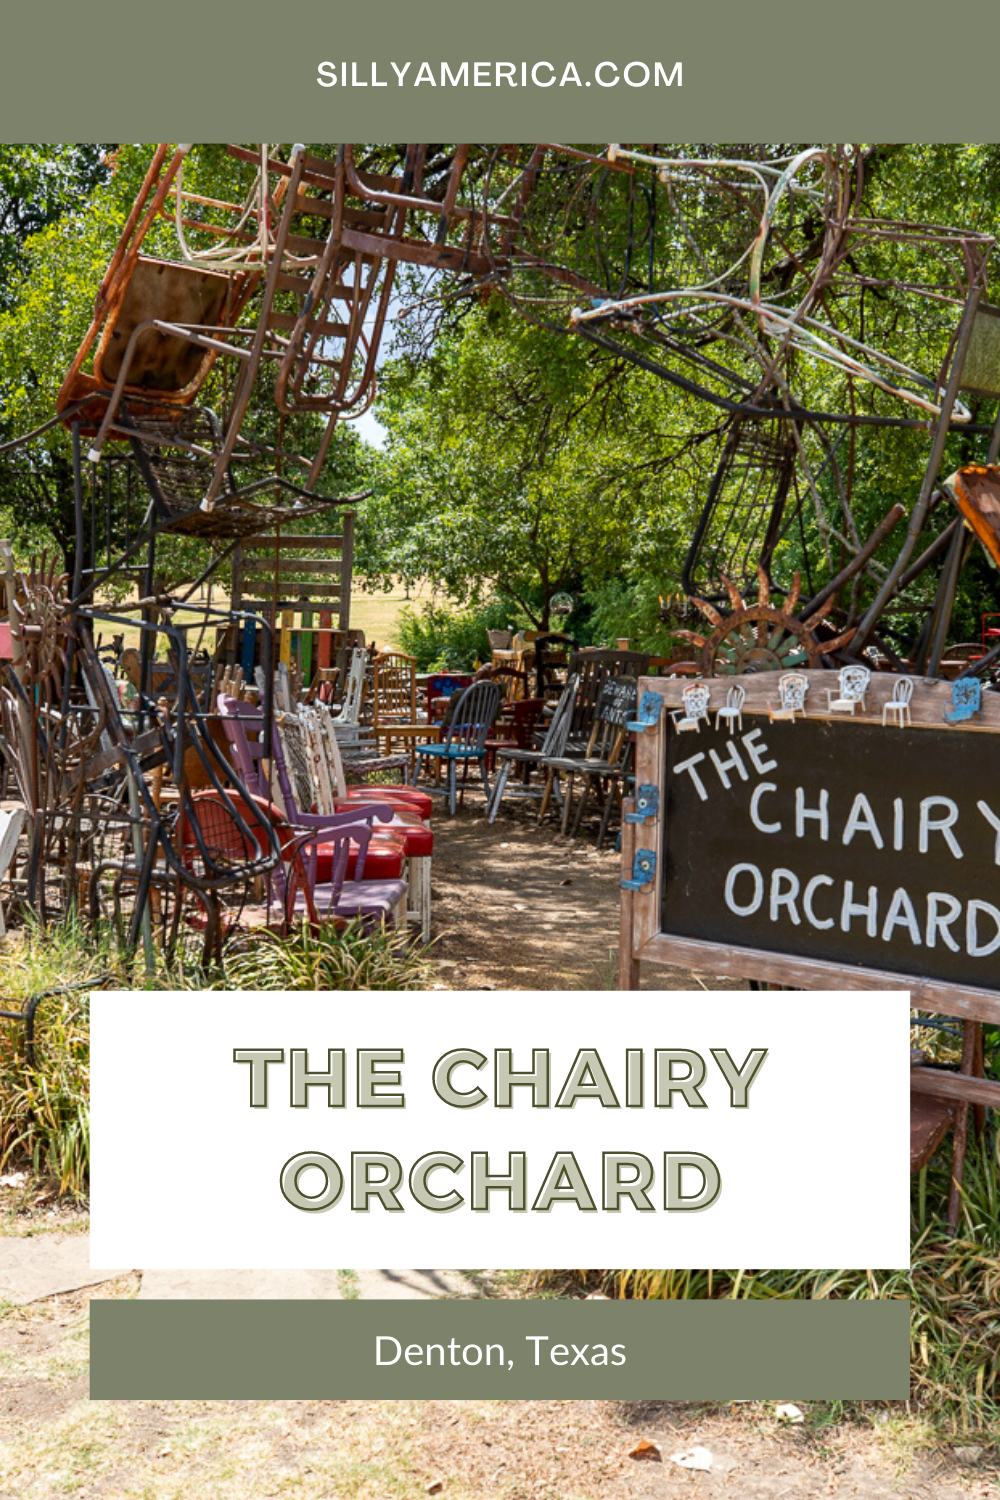 The Chairy Orchard in Denton, Texas might be a little different than what you're expecting. If you show up thinking that you're going to spend the day picking fruit, you might be a little disappointed. But that type of orchard takes a backseat to this type. If you're looking for a unique Texas roadside attraction, get ready to take a seat, at this orchard, you'll find chairs, not cherries. #Texas #TexasRoadTrip #RoadTripStop #RoadsideAttraction #RoadsideAttractions #TexasRoadsideAttraction